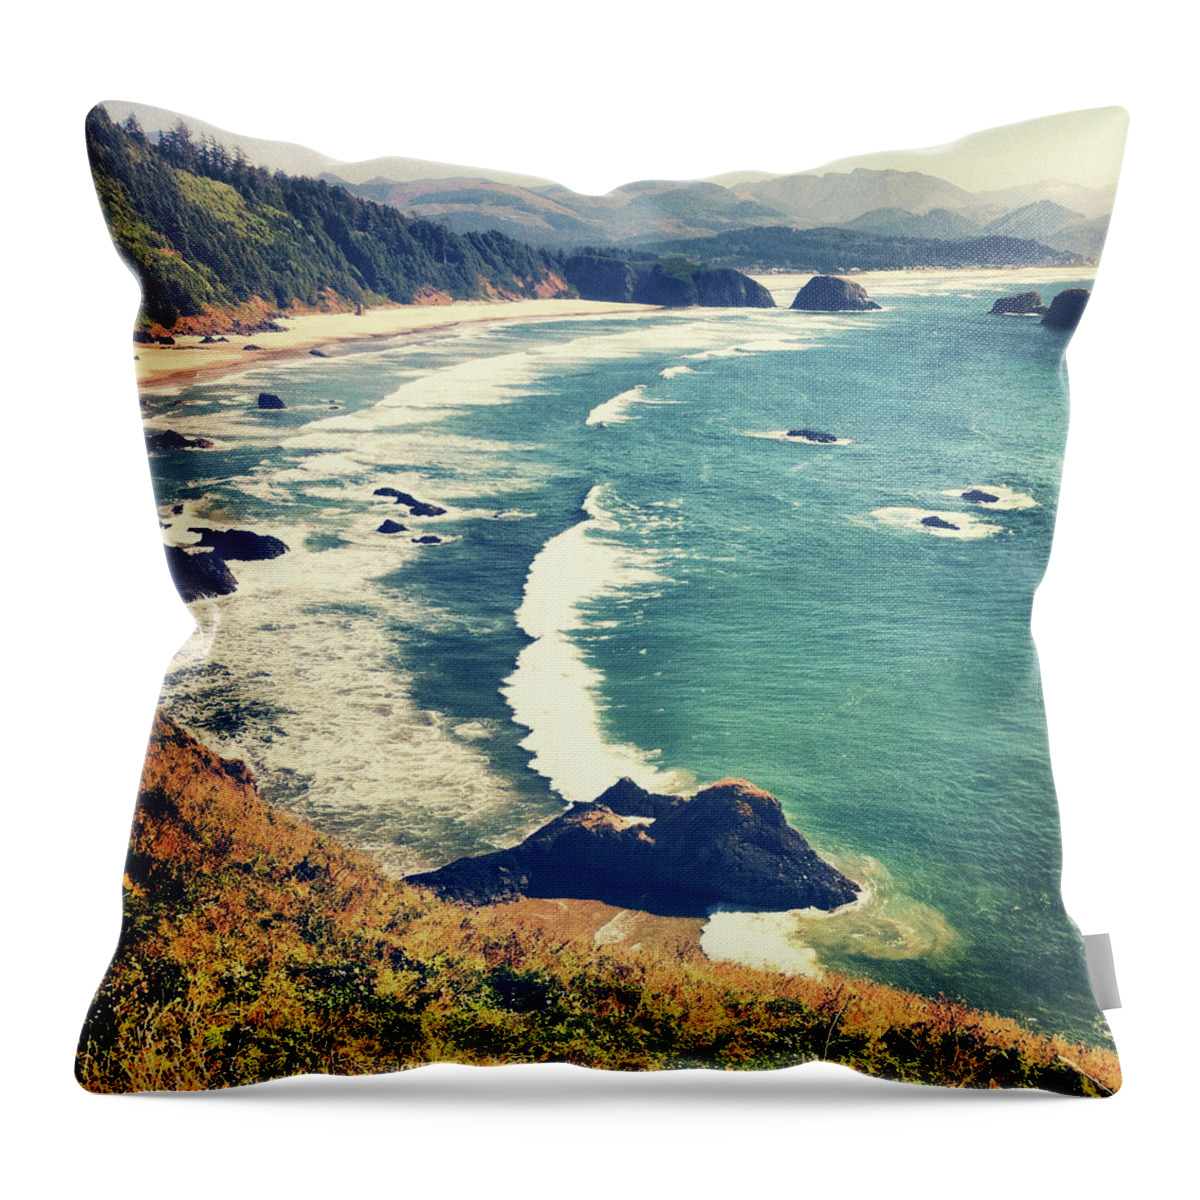 Scenics Throw Pillow featuring the photograph Oregon Coast by Andipantz